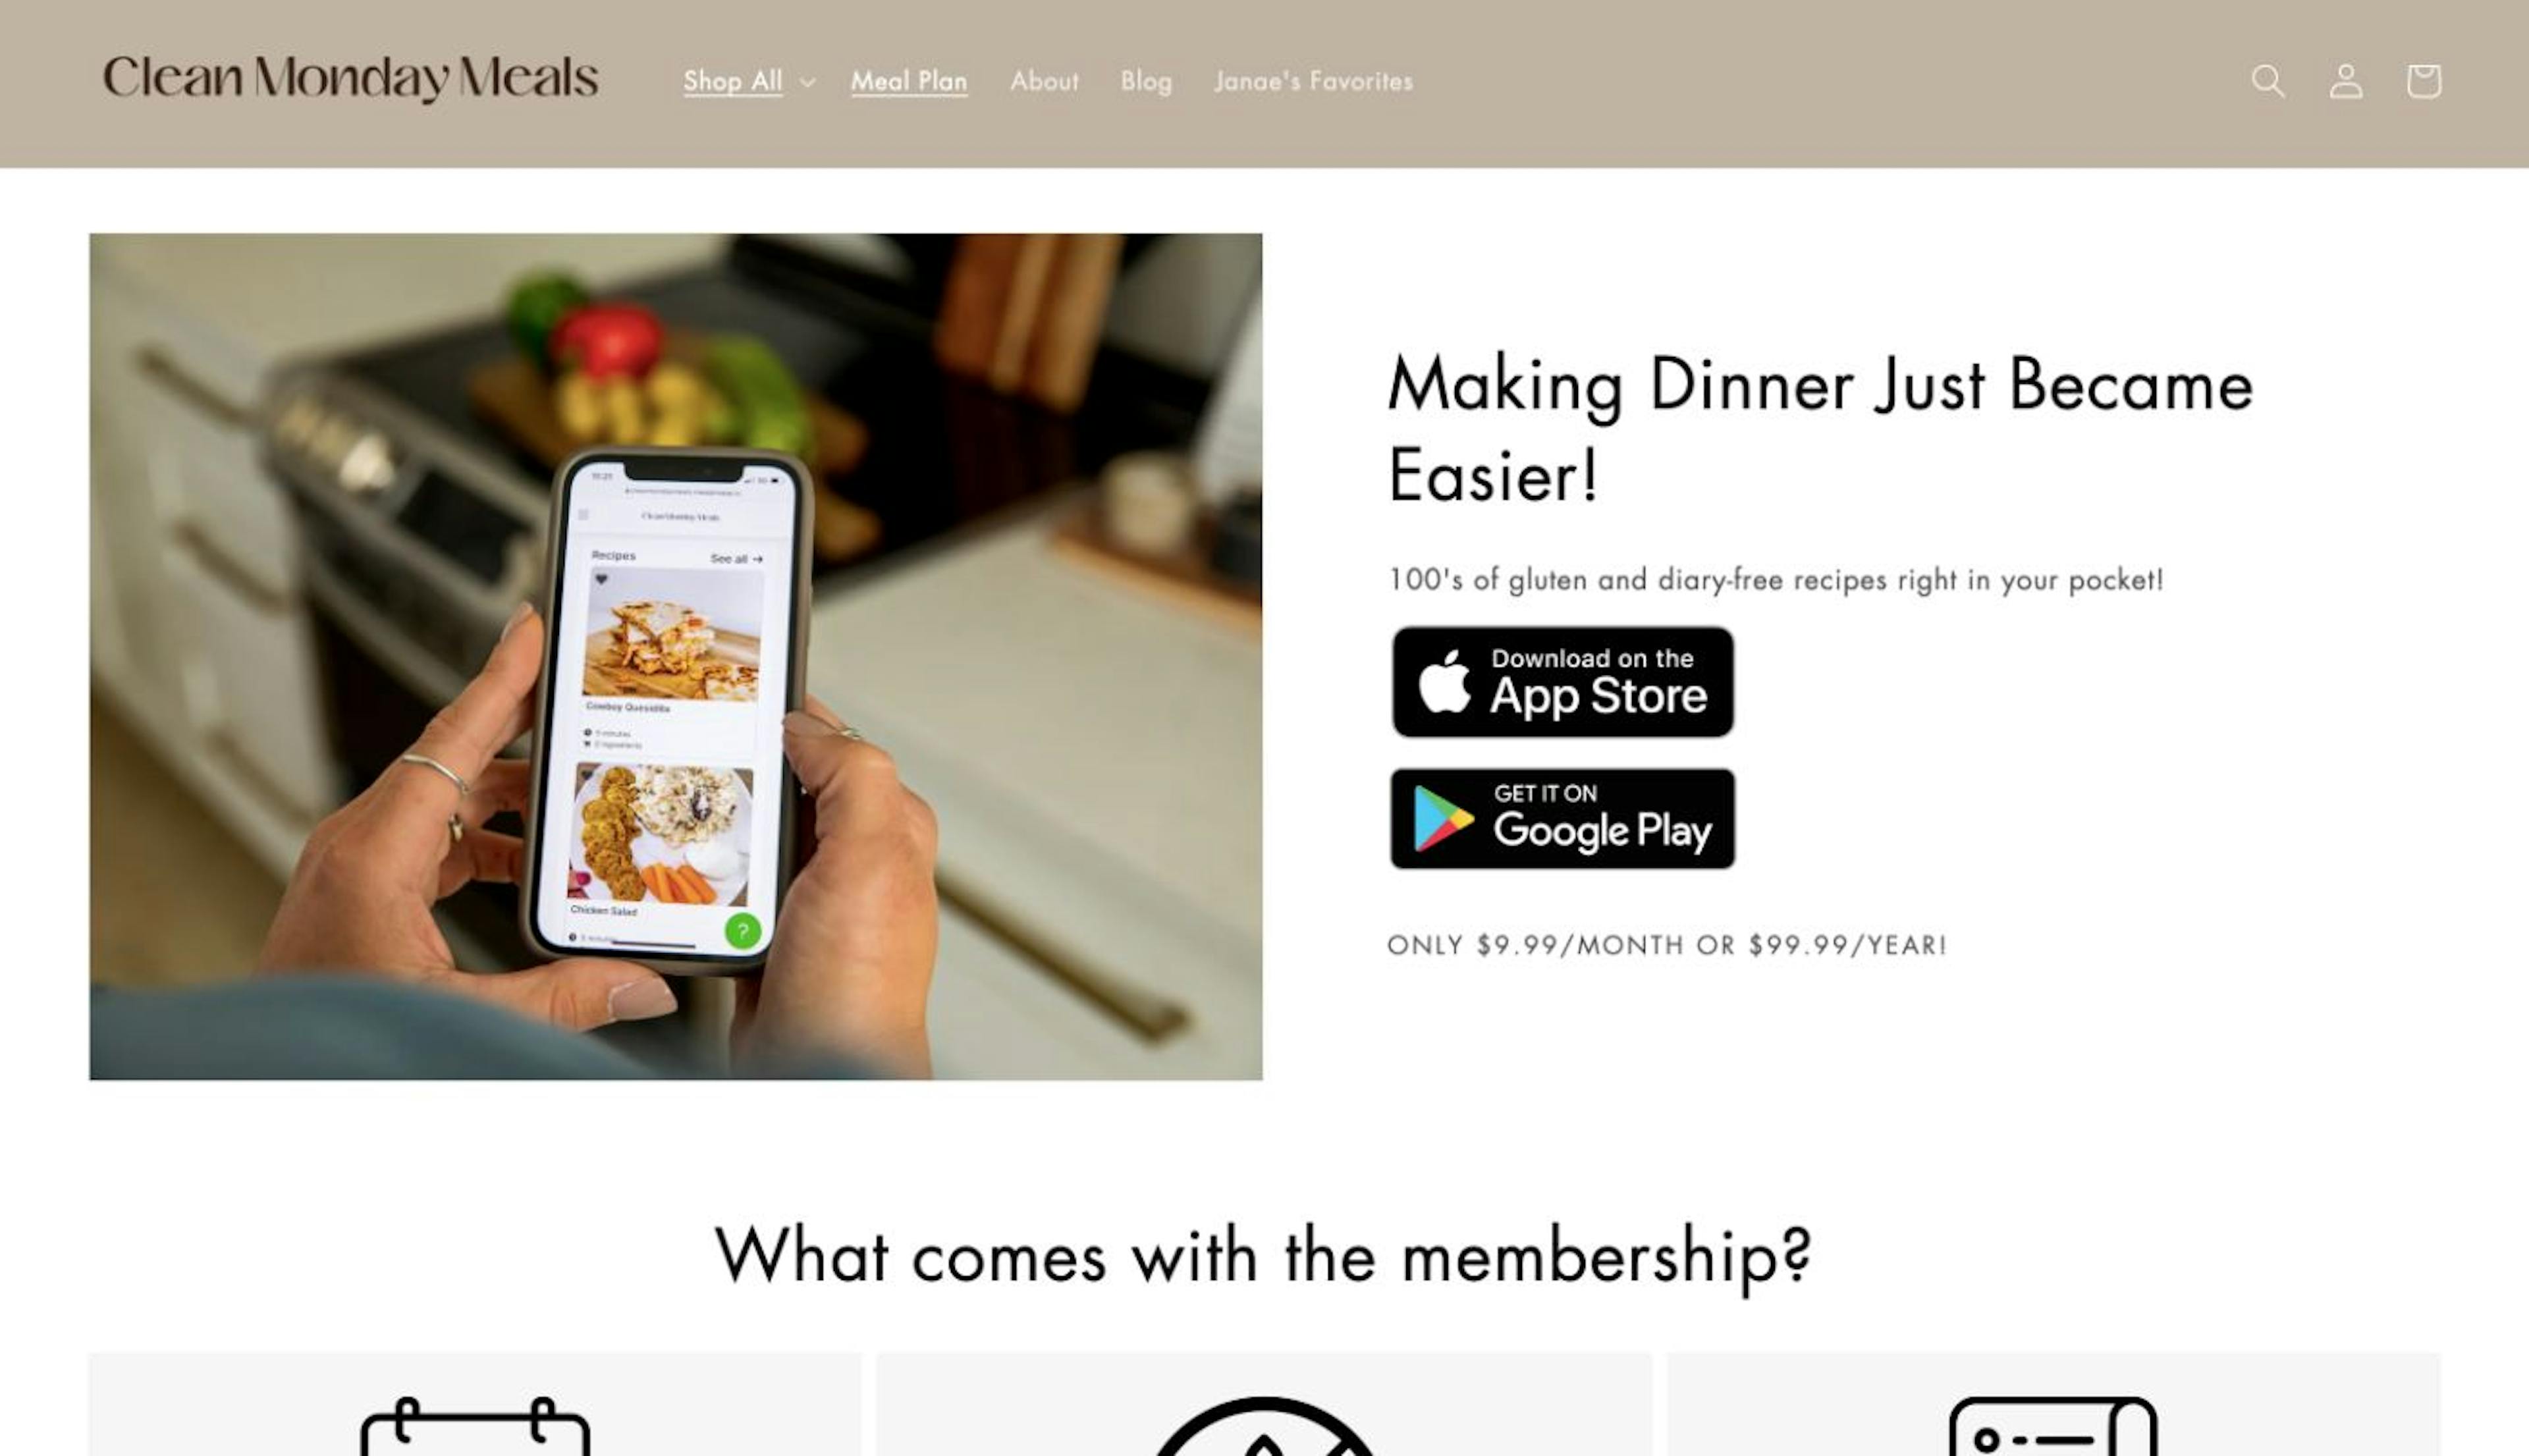 Customers could create their own mobile app with MealPro App